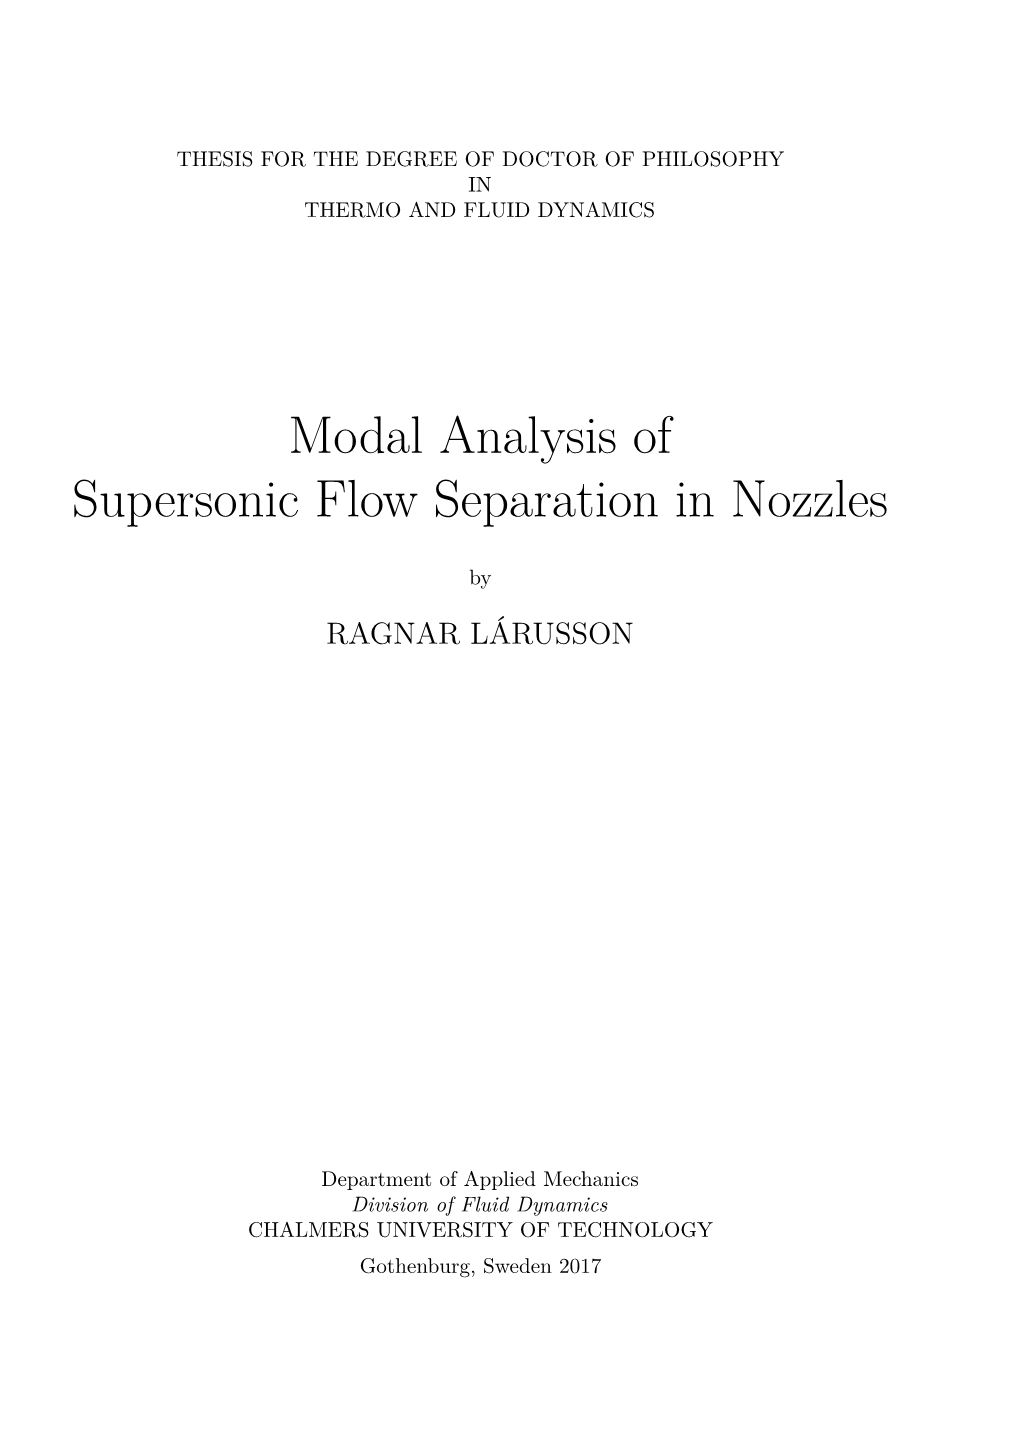 Modal Analysis of Supersonic Flow Separation in Nozzles